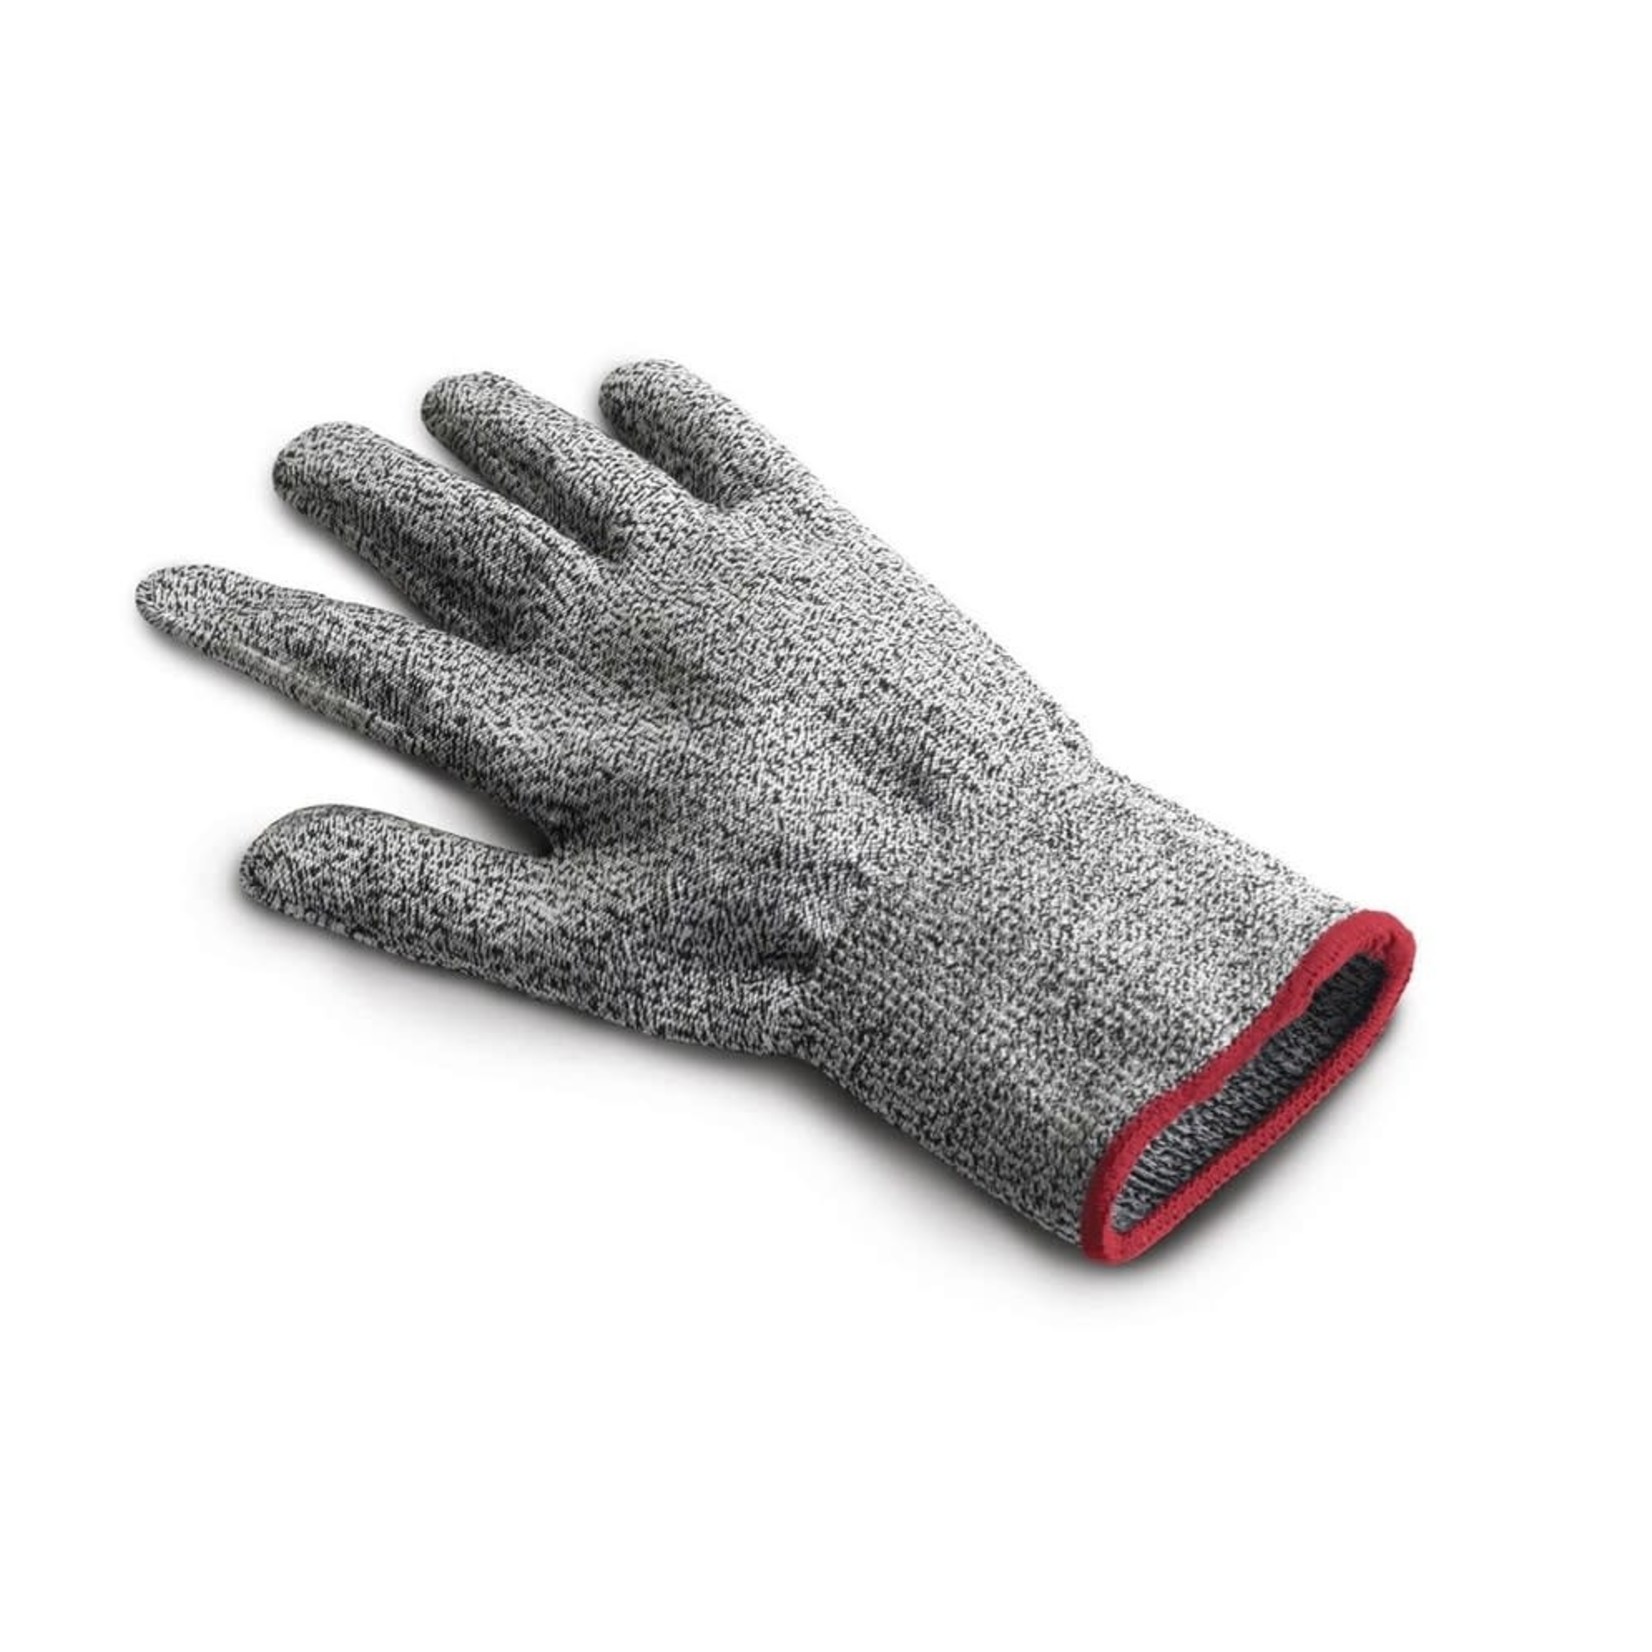 CUISIPRO CUISIPRO Cut Resistant Glove